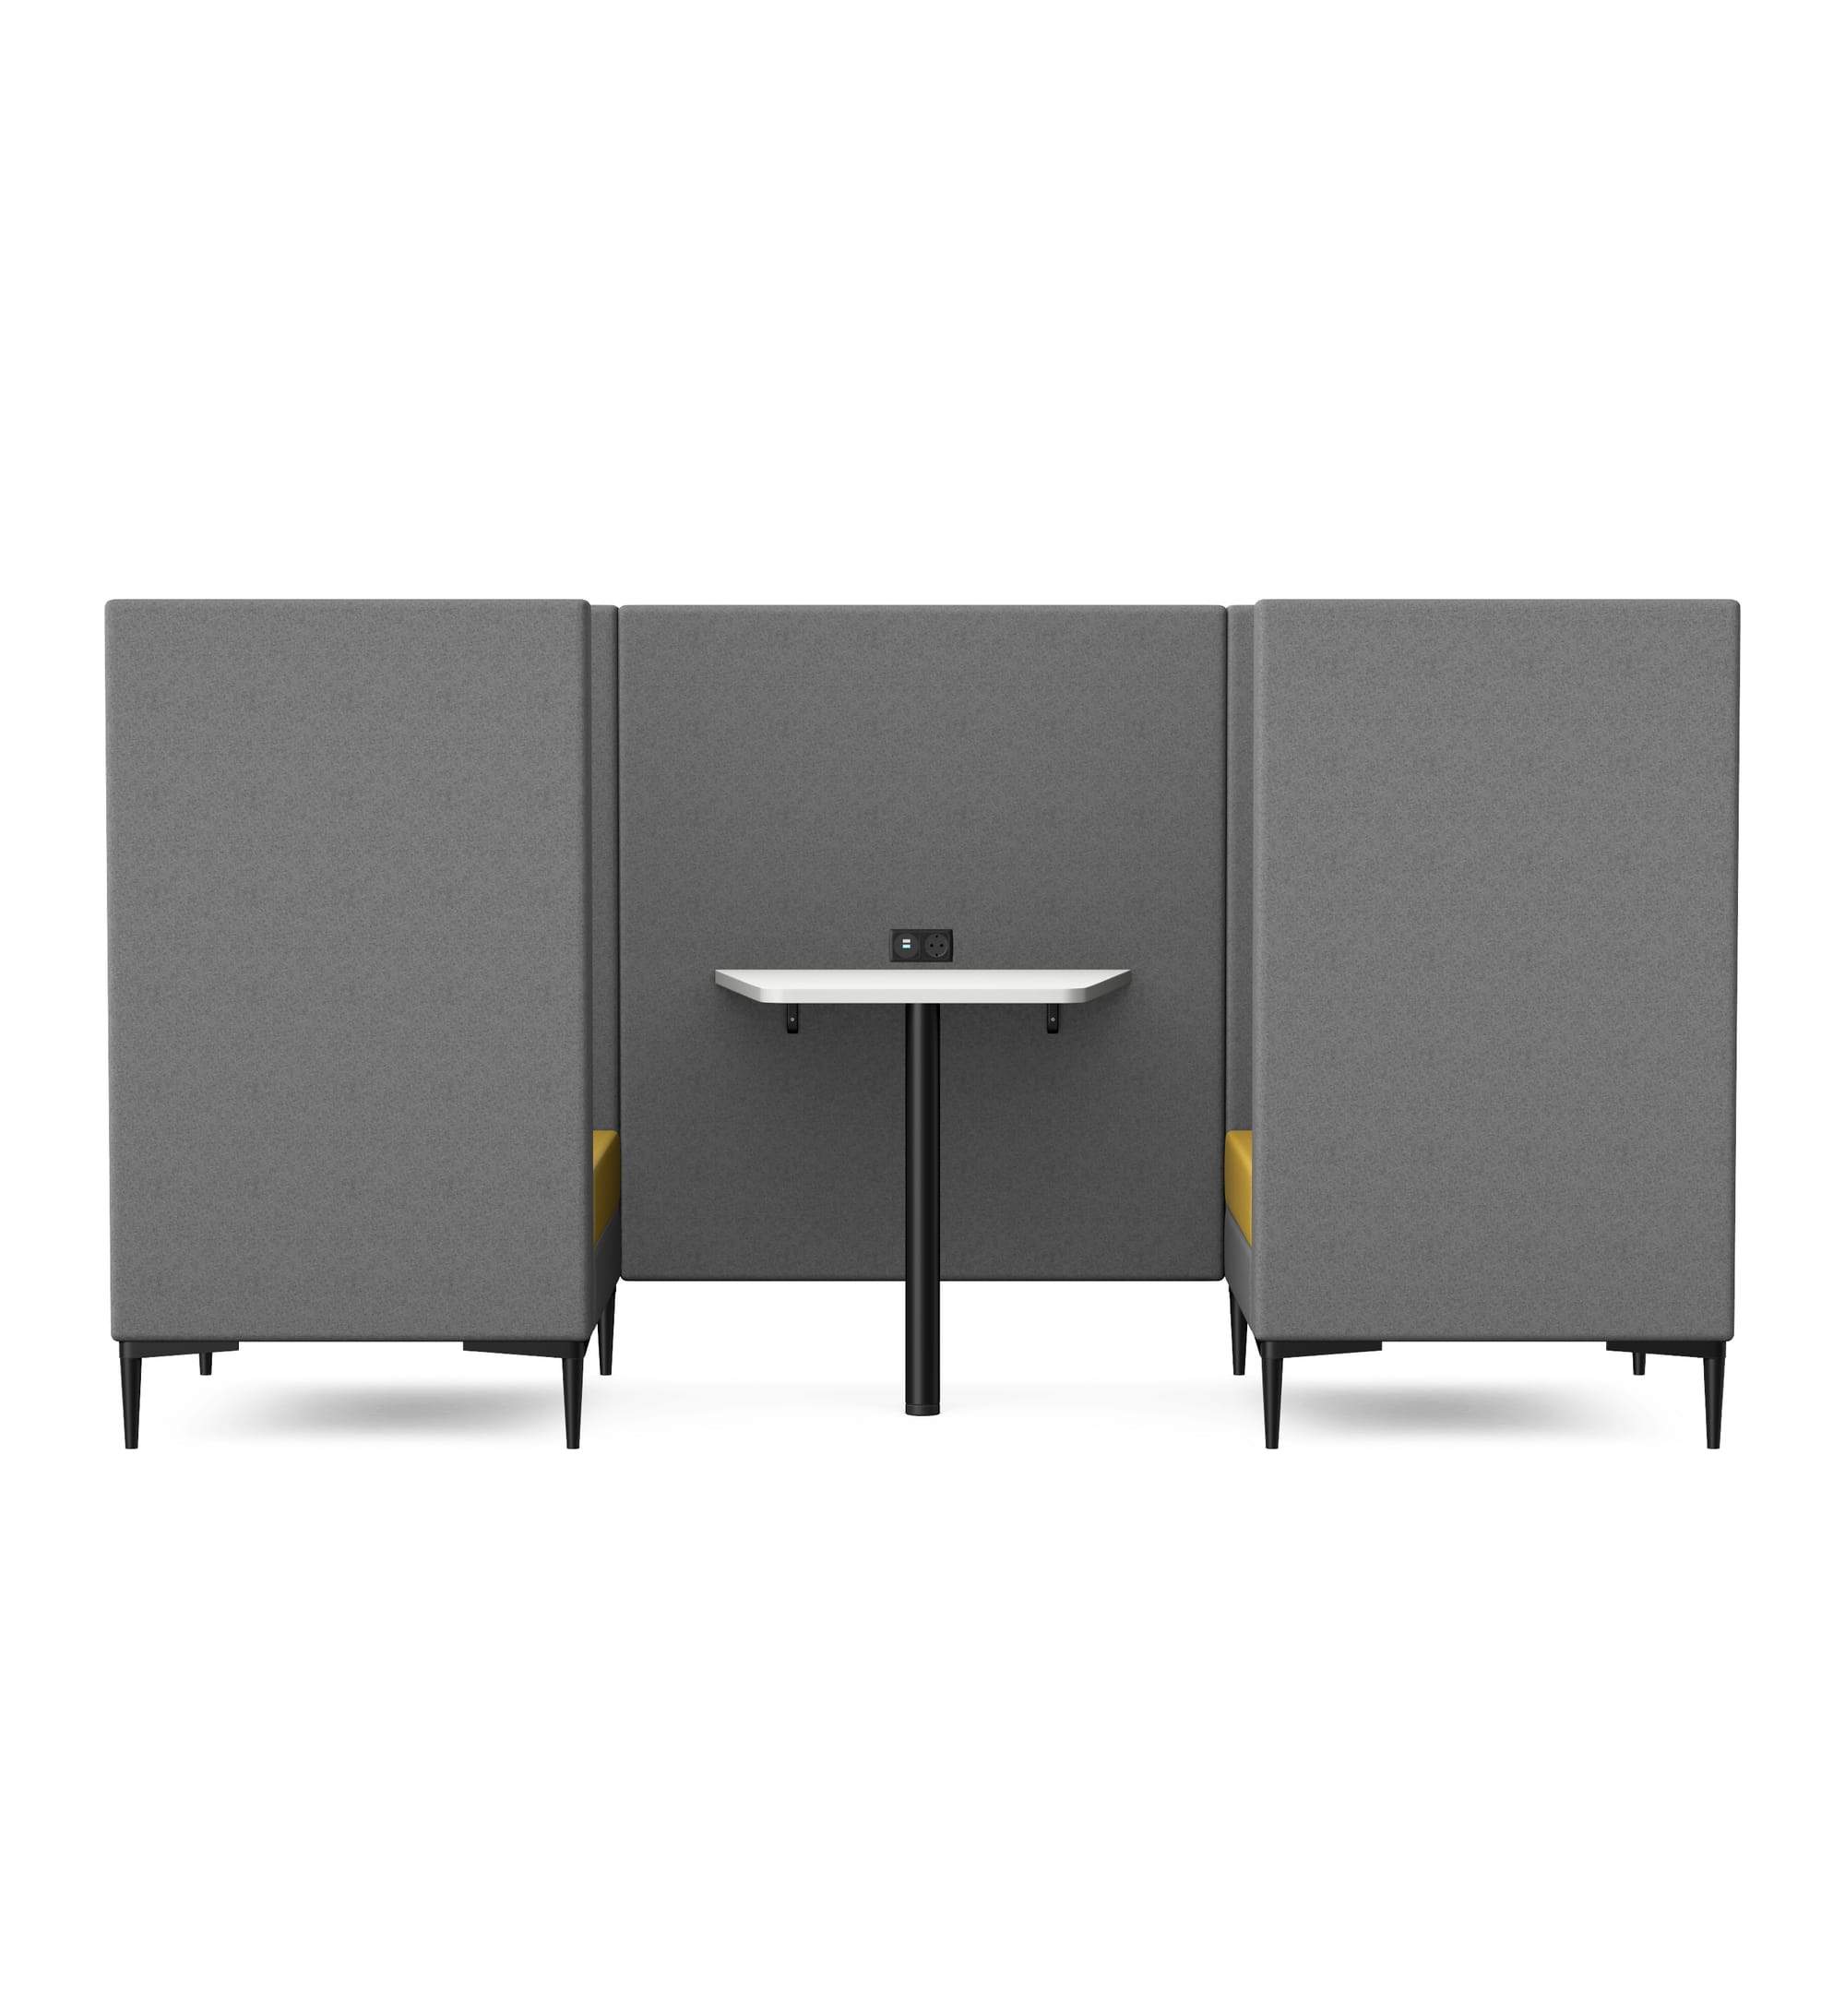 ELEMENT - Two Seat Highback Booth with Table